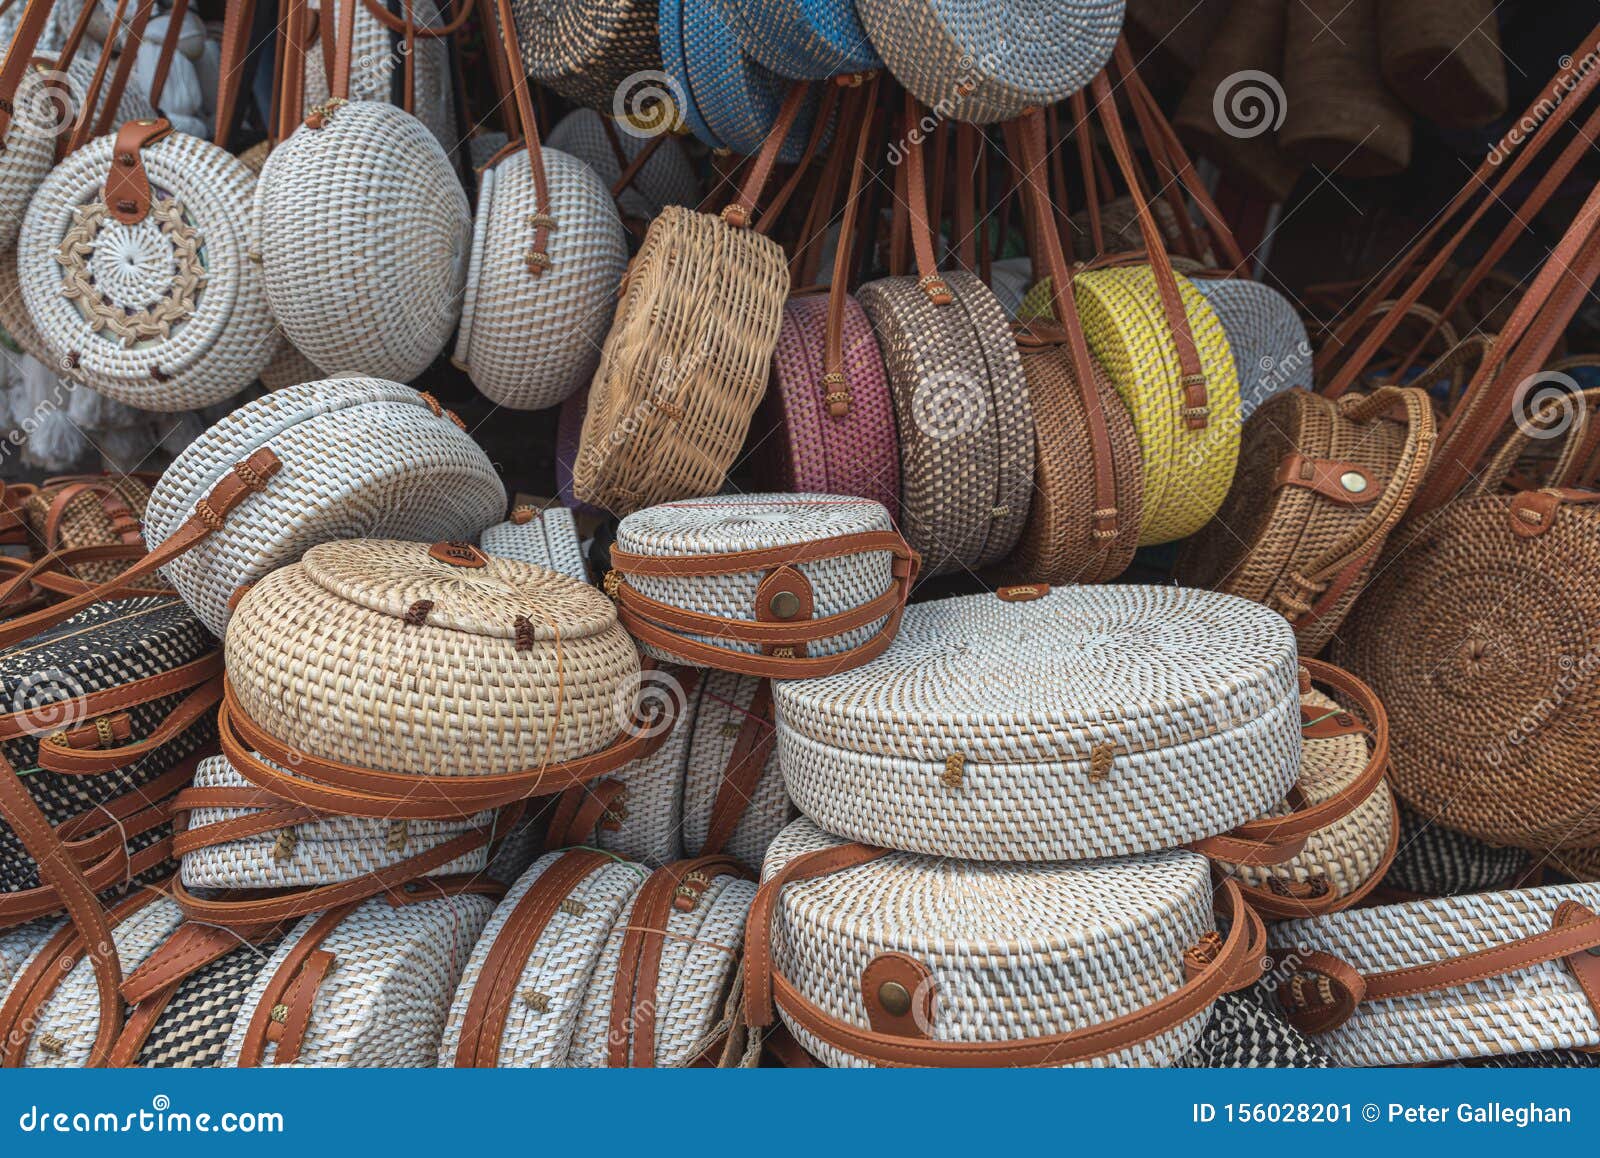 Balinese Handmade Rattan Eco Bags In A Local Souvenir Market In Bali,  Indonesia Stock Photo, Picture and Royalty Free Image. Image 117598284.